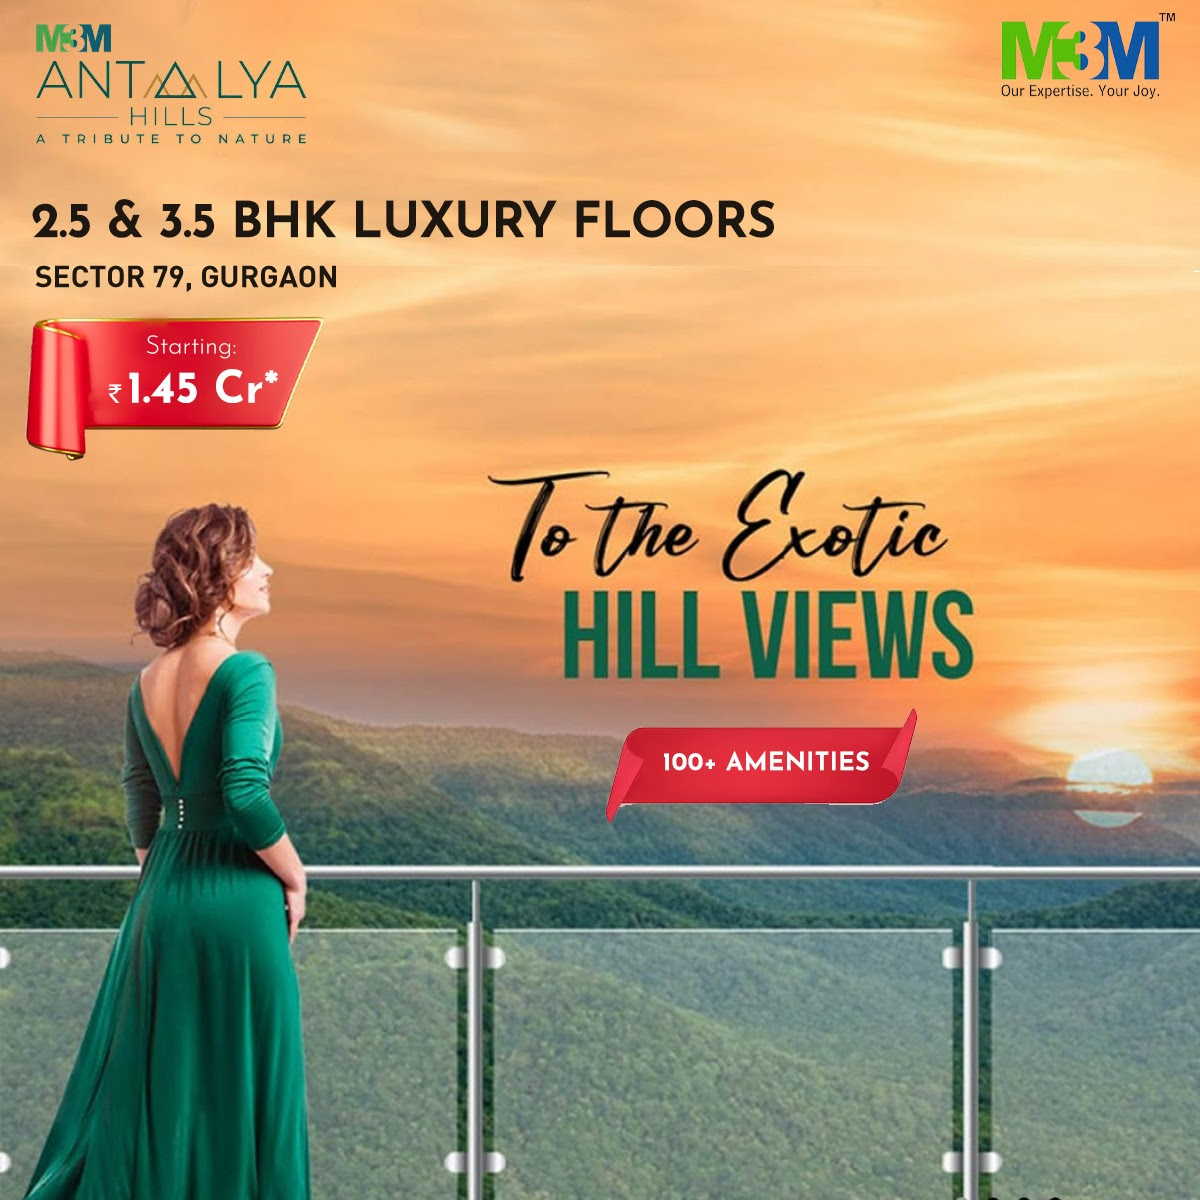 Presenting 5:95 subvention payment plan and 26% extra discount at M3M Antalya Hills, Gurgaon Update